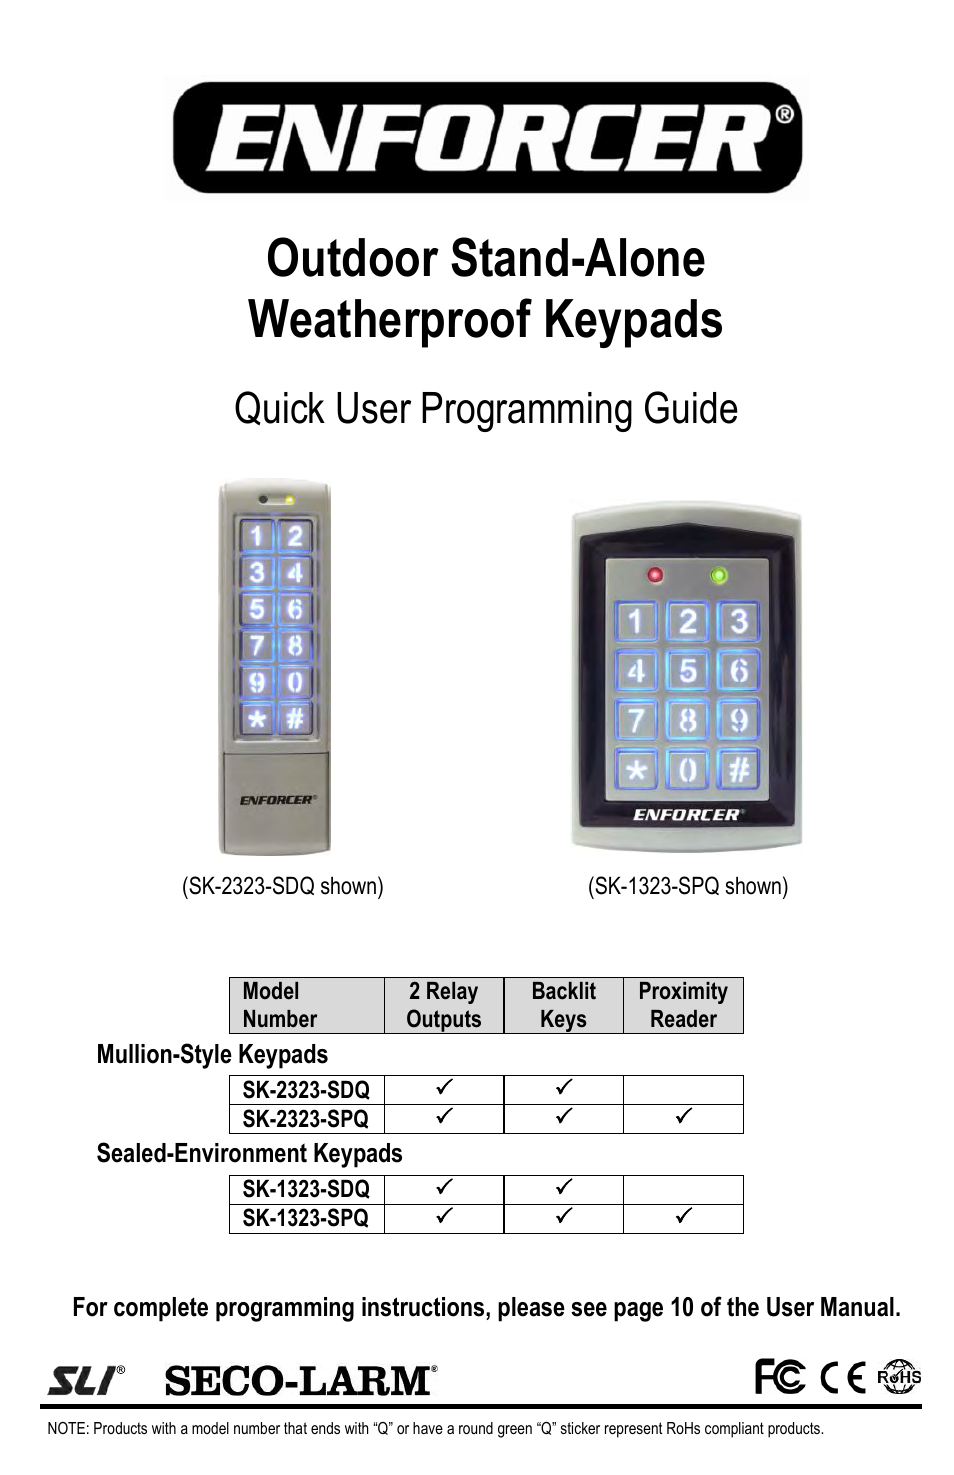 Outdoor Stand-Alone Weatherproof Keypads SK-2323-SDQ